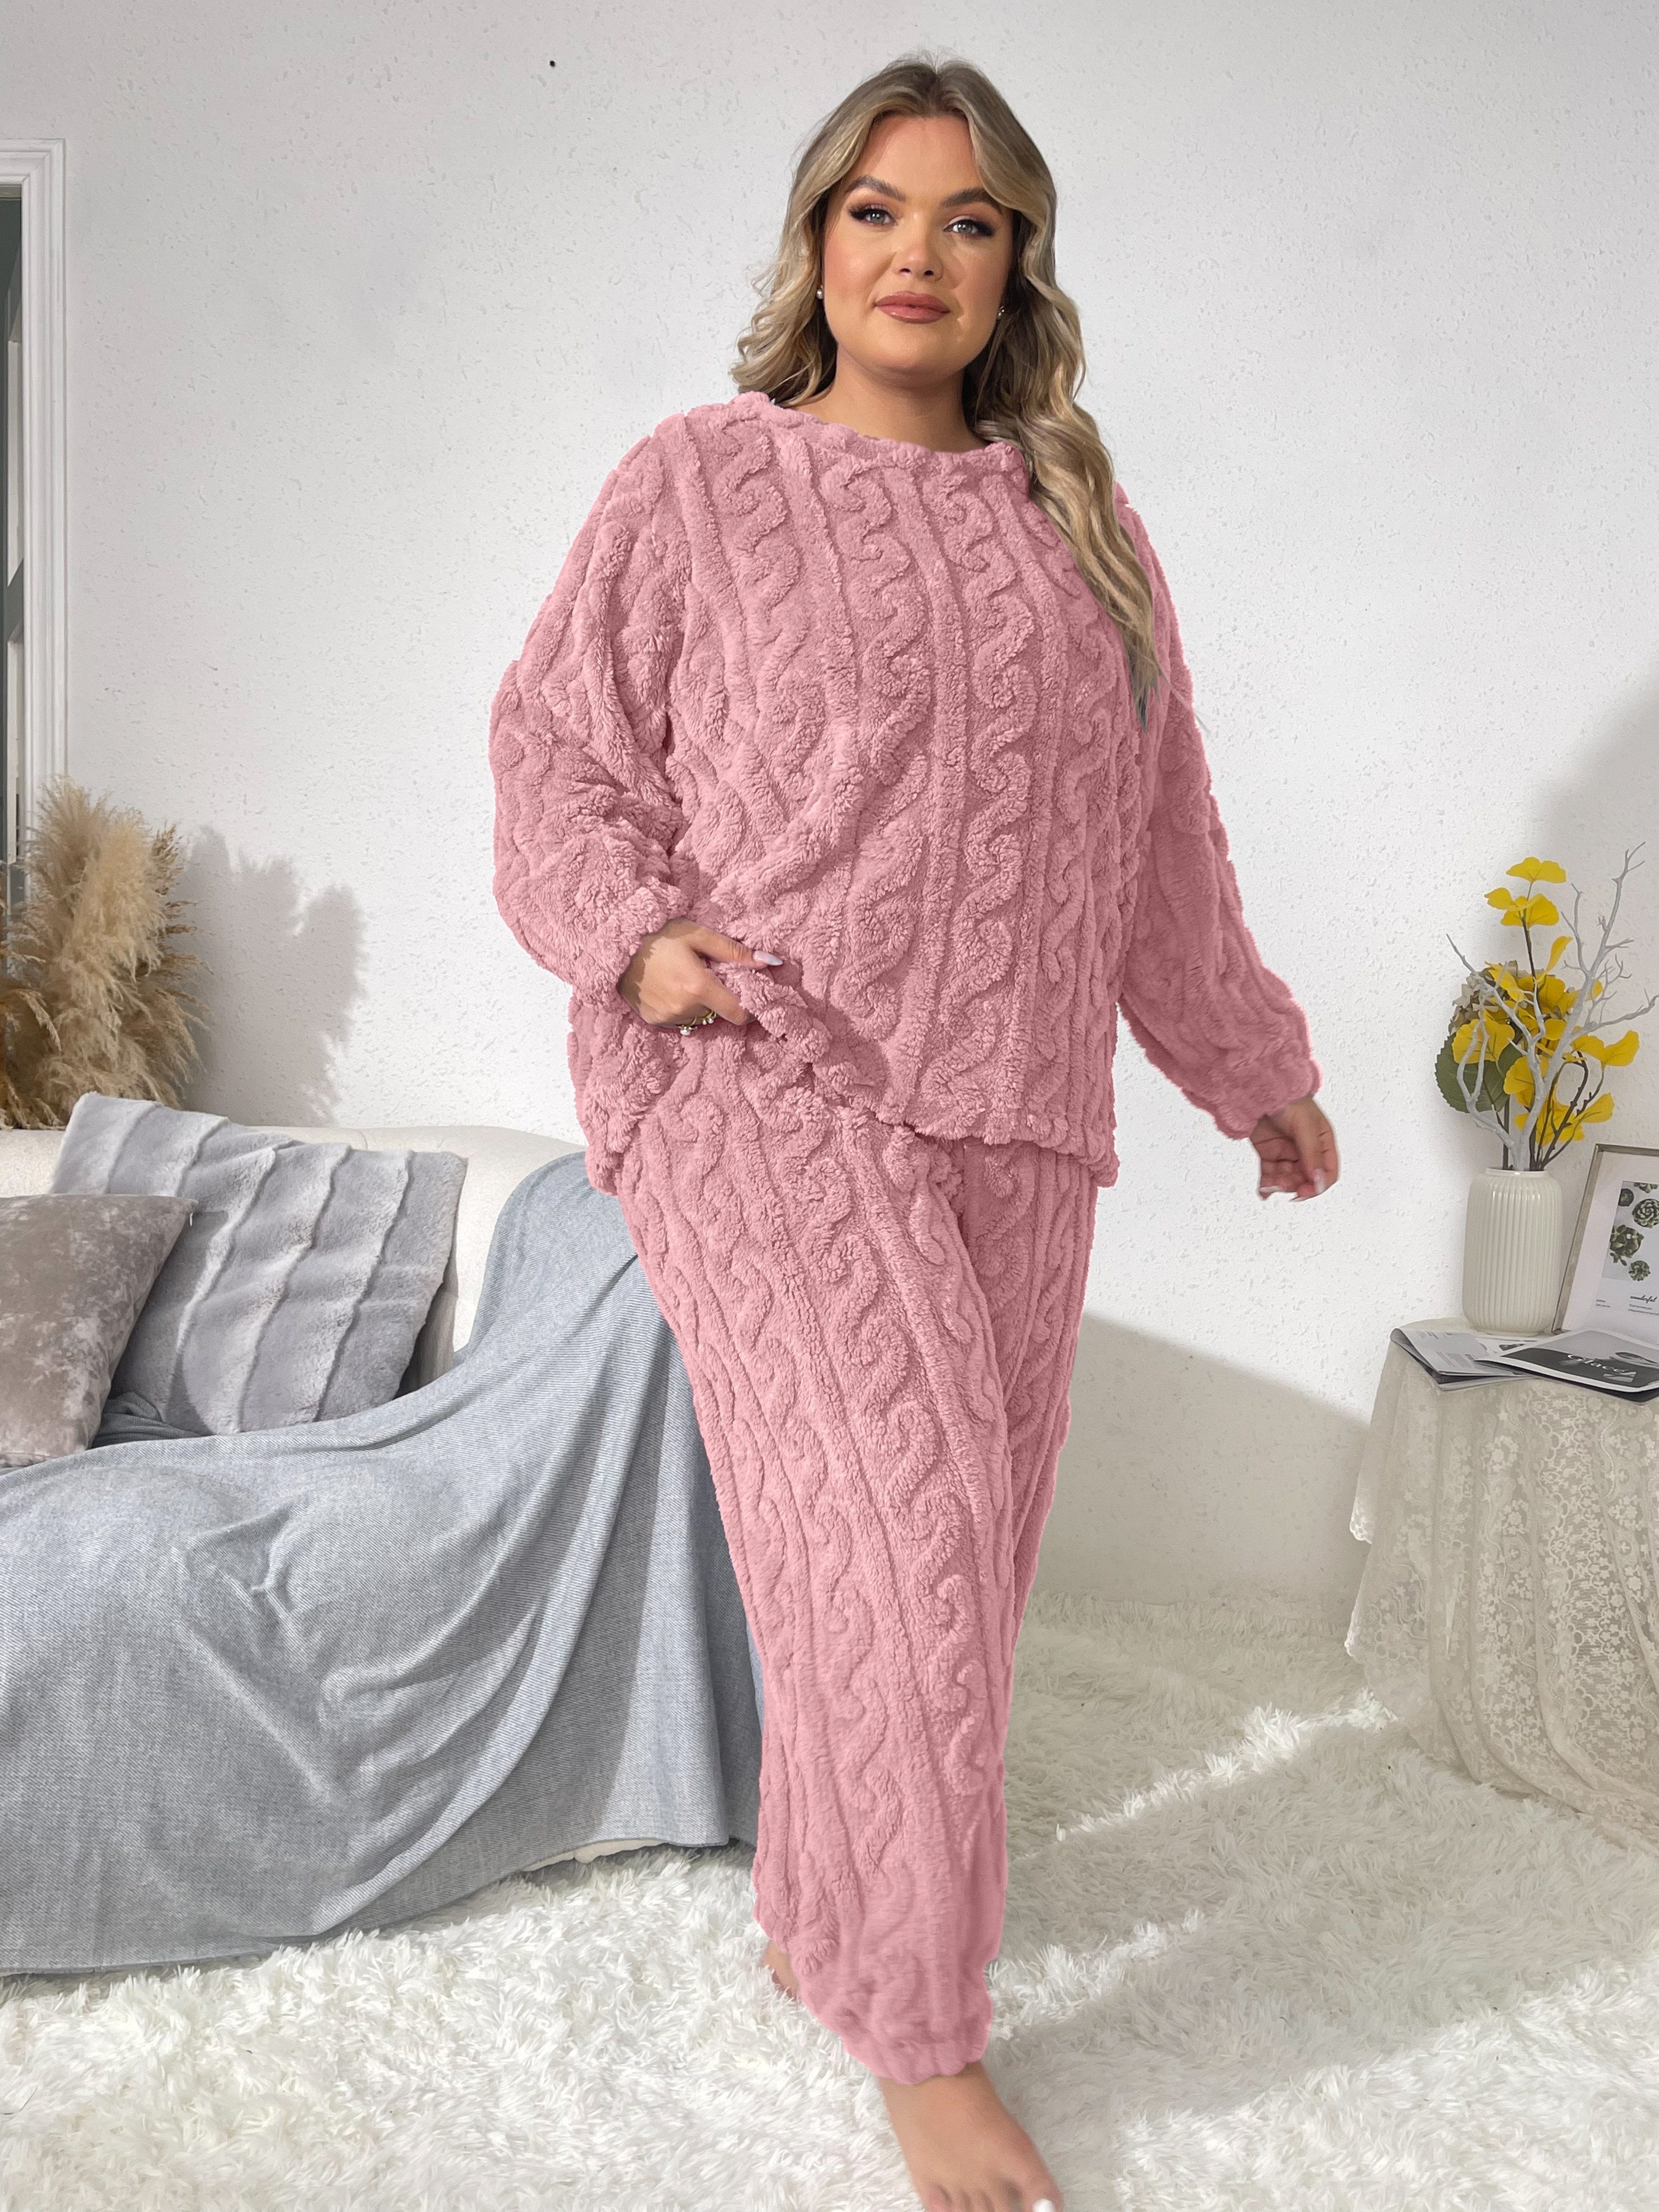 Women's Fuzzy 2 Piece Outfits Casual Pajama Sets Long Sleeve